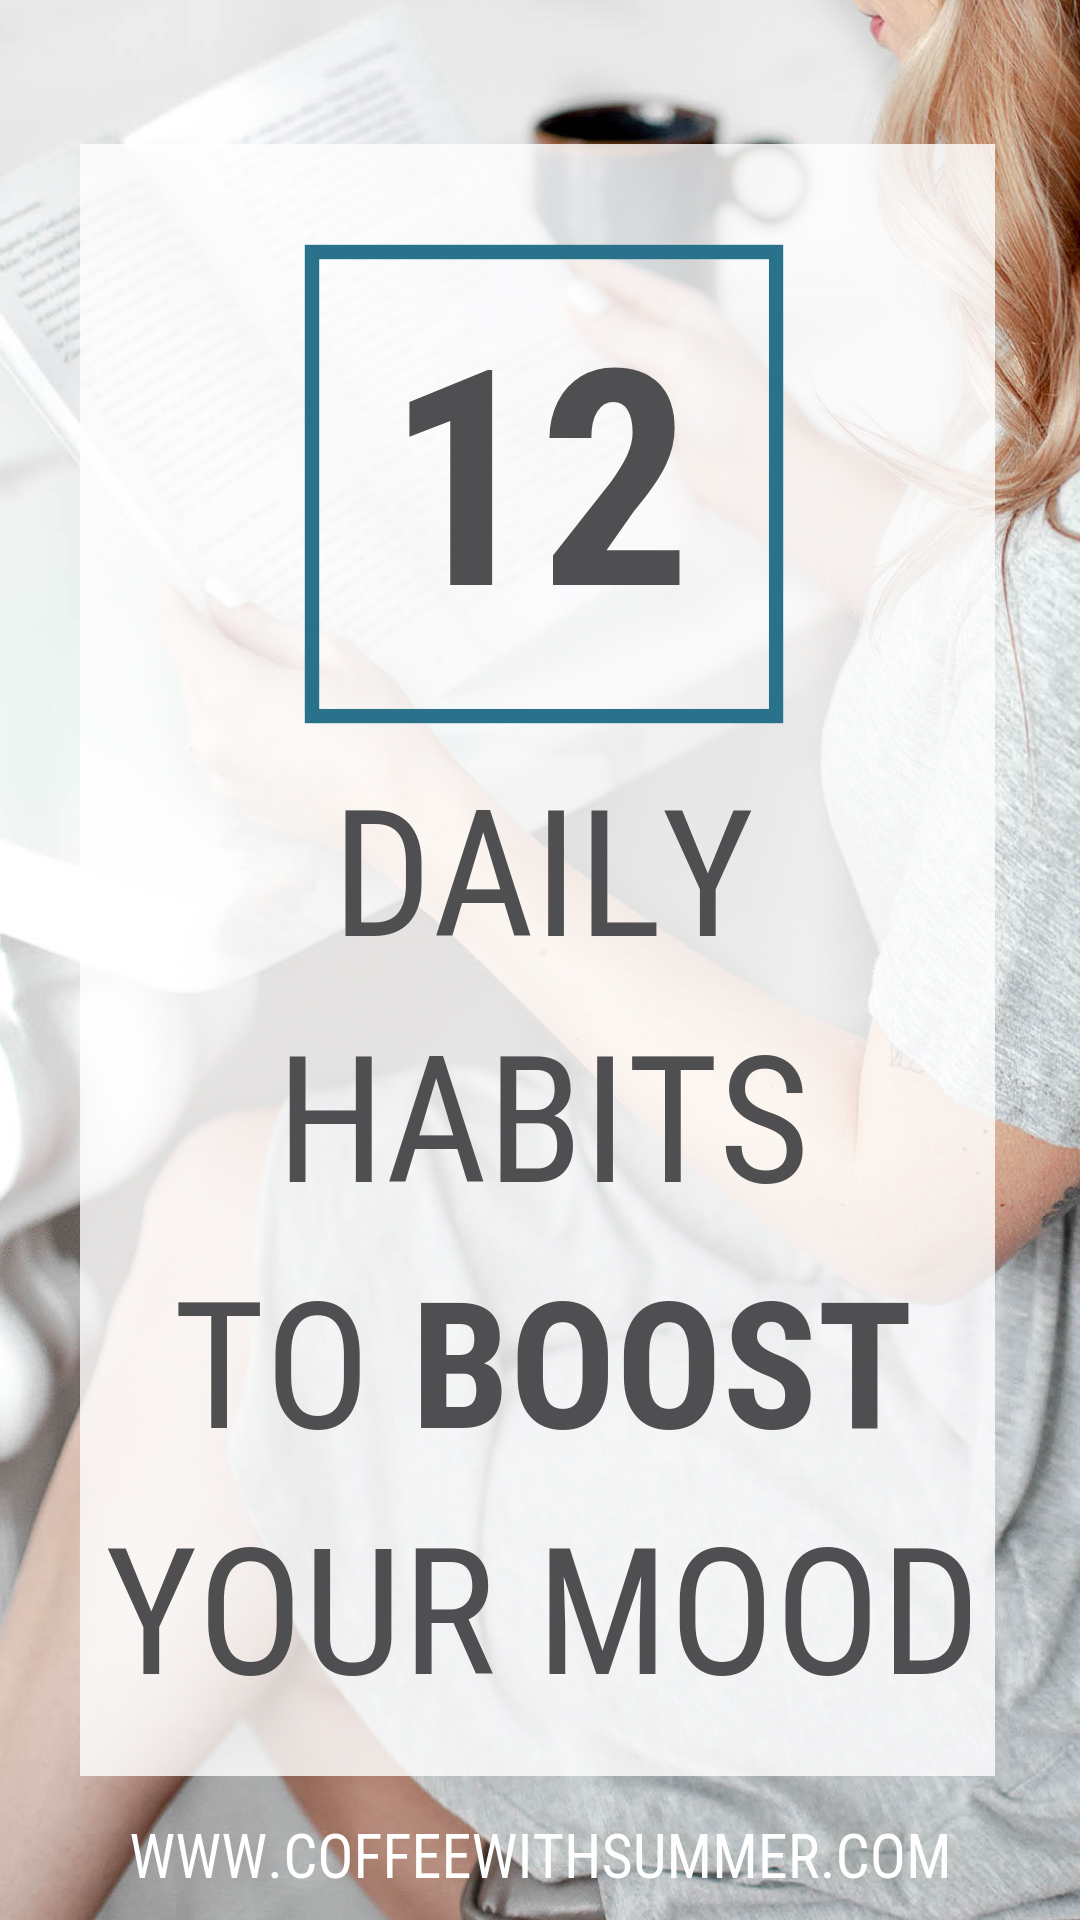 12 Daily Habits To Boost Your Mood